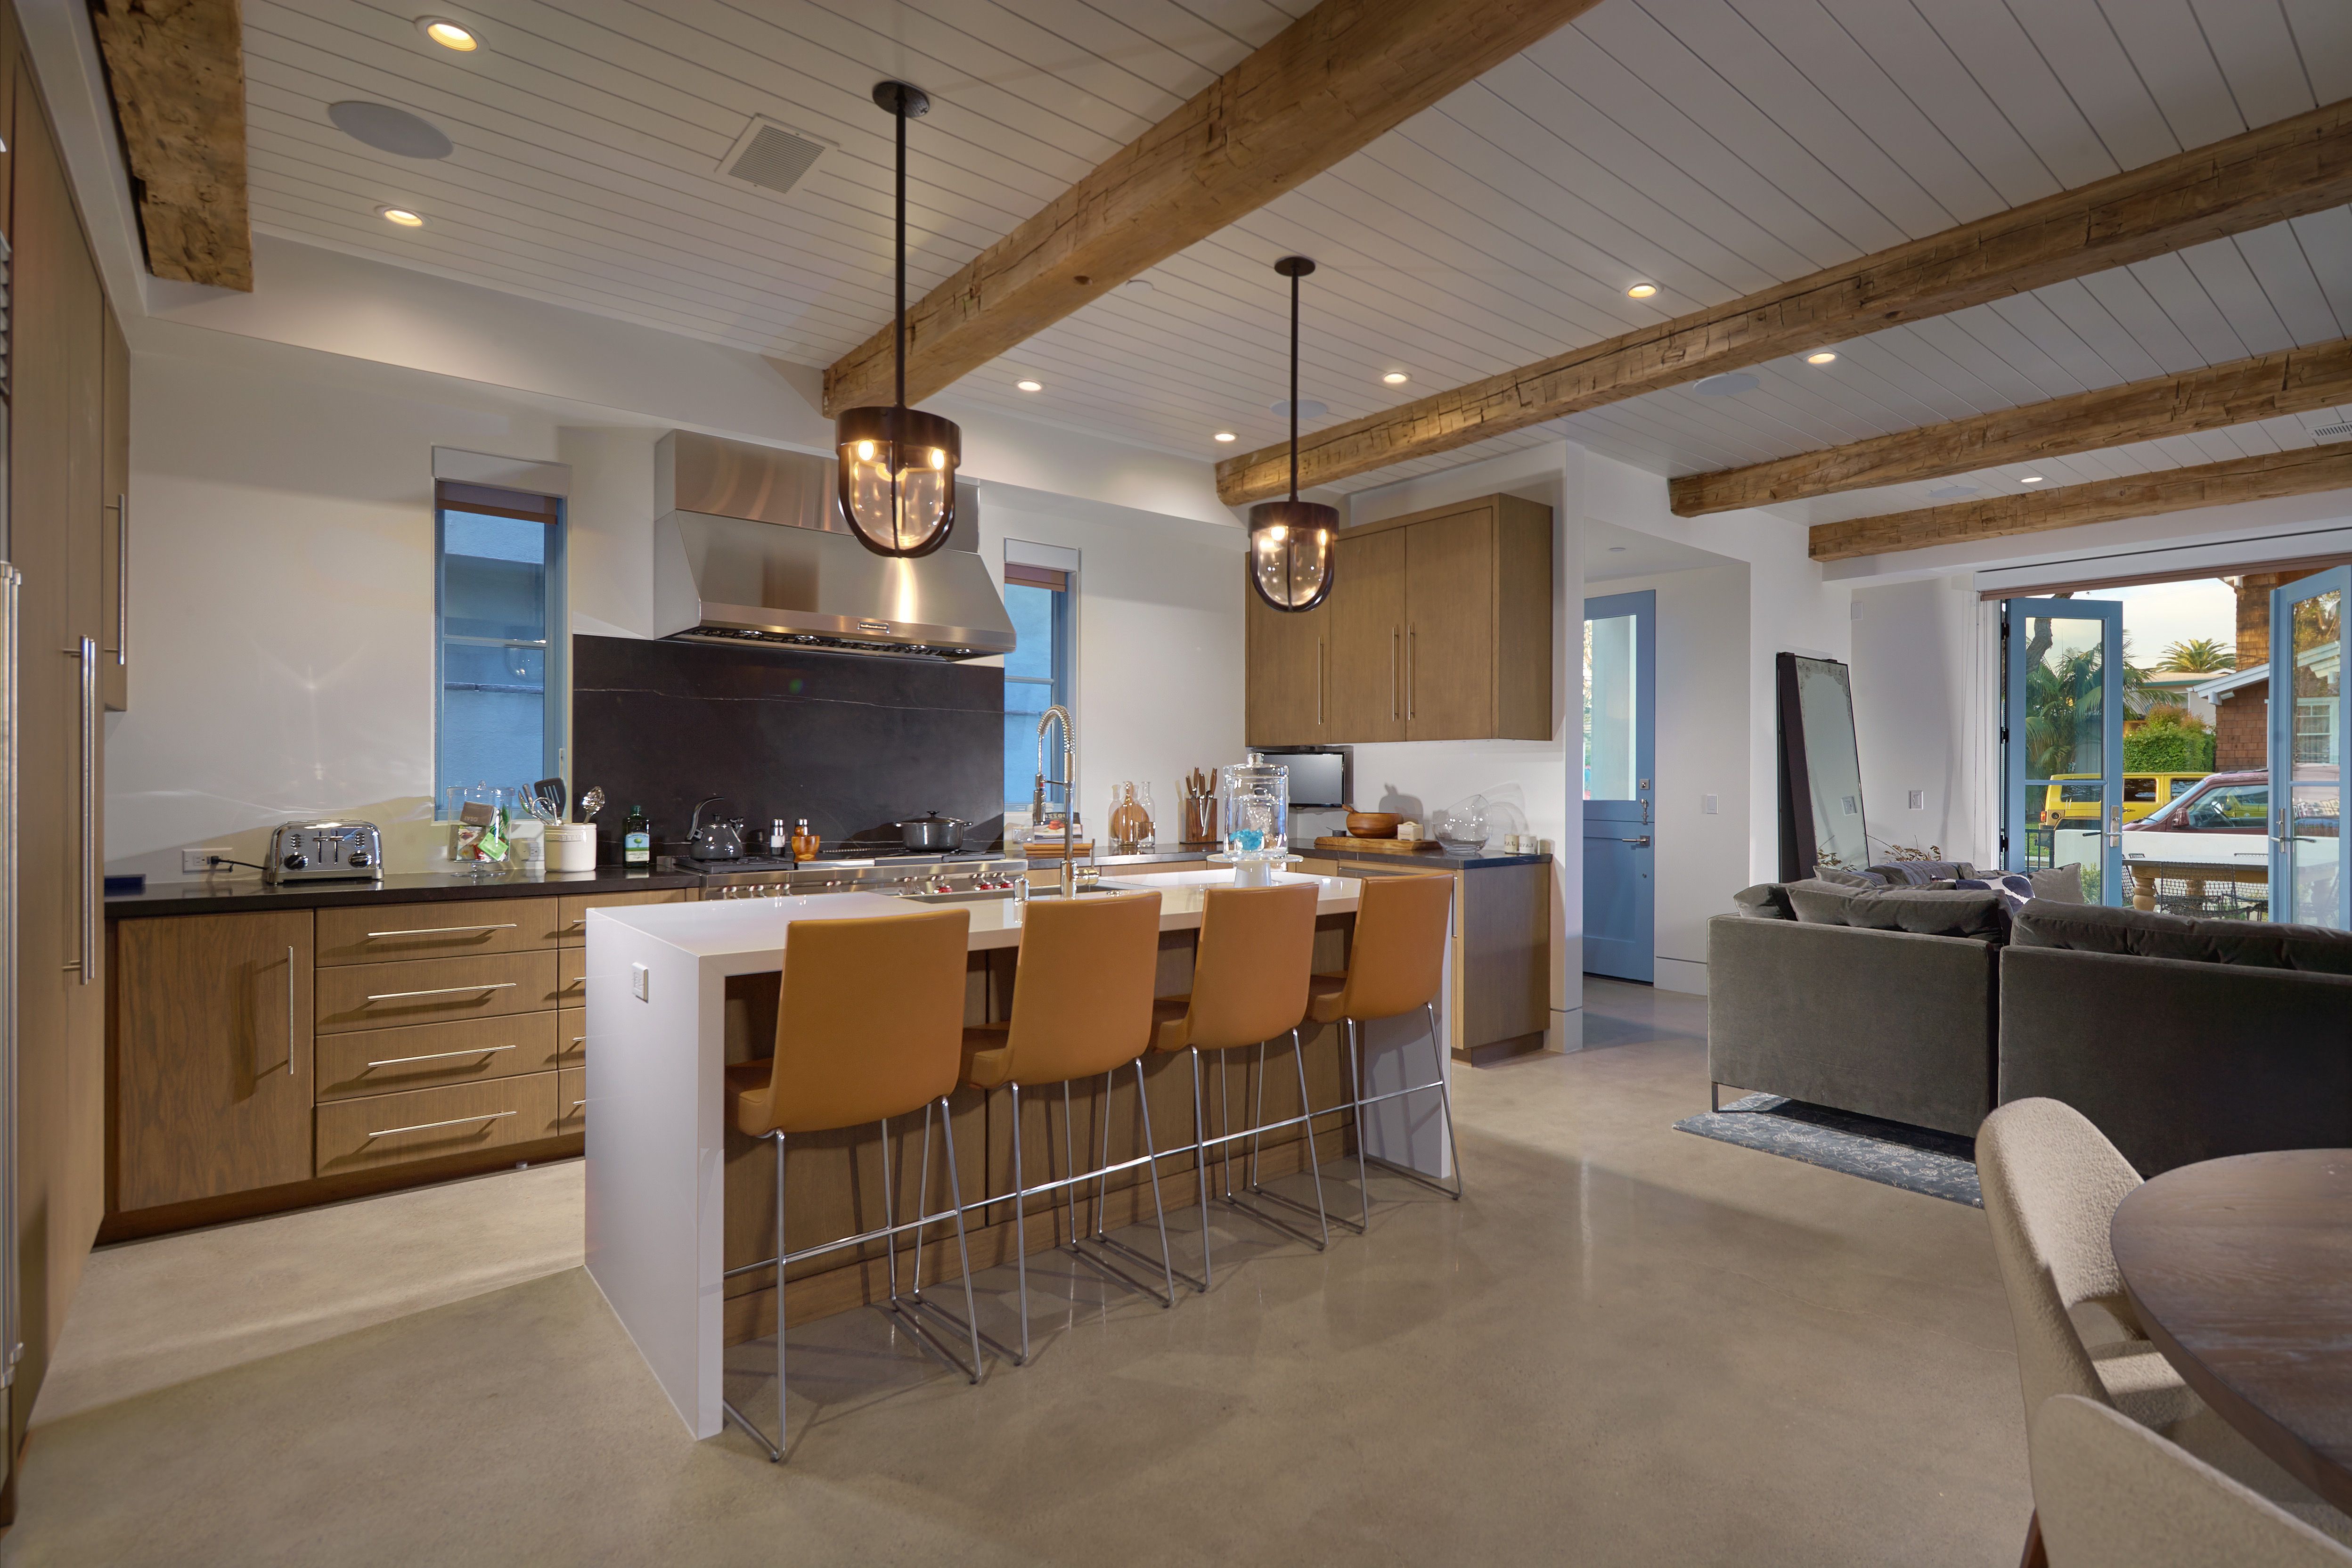 Modern White Paneled Ceiling With Exposed Wood Beams Above Contemporary Open Plan Kitchen (View 21 of 31)